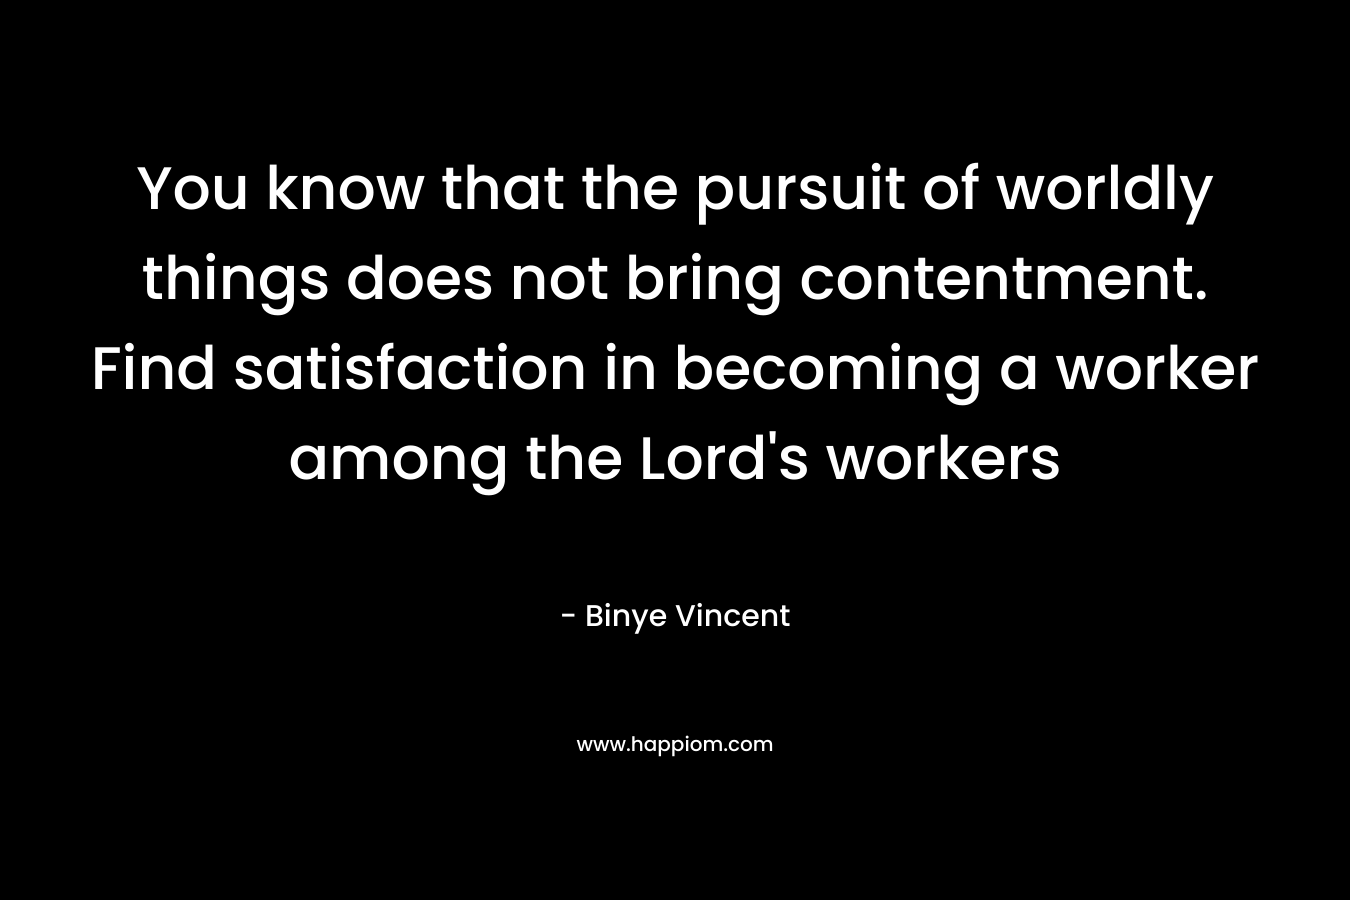 You know that the pursuit of worldly things does not bring contentment. Find satisfaction in becoming a worker among the Lord’s workers – Binye Vincent